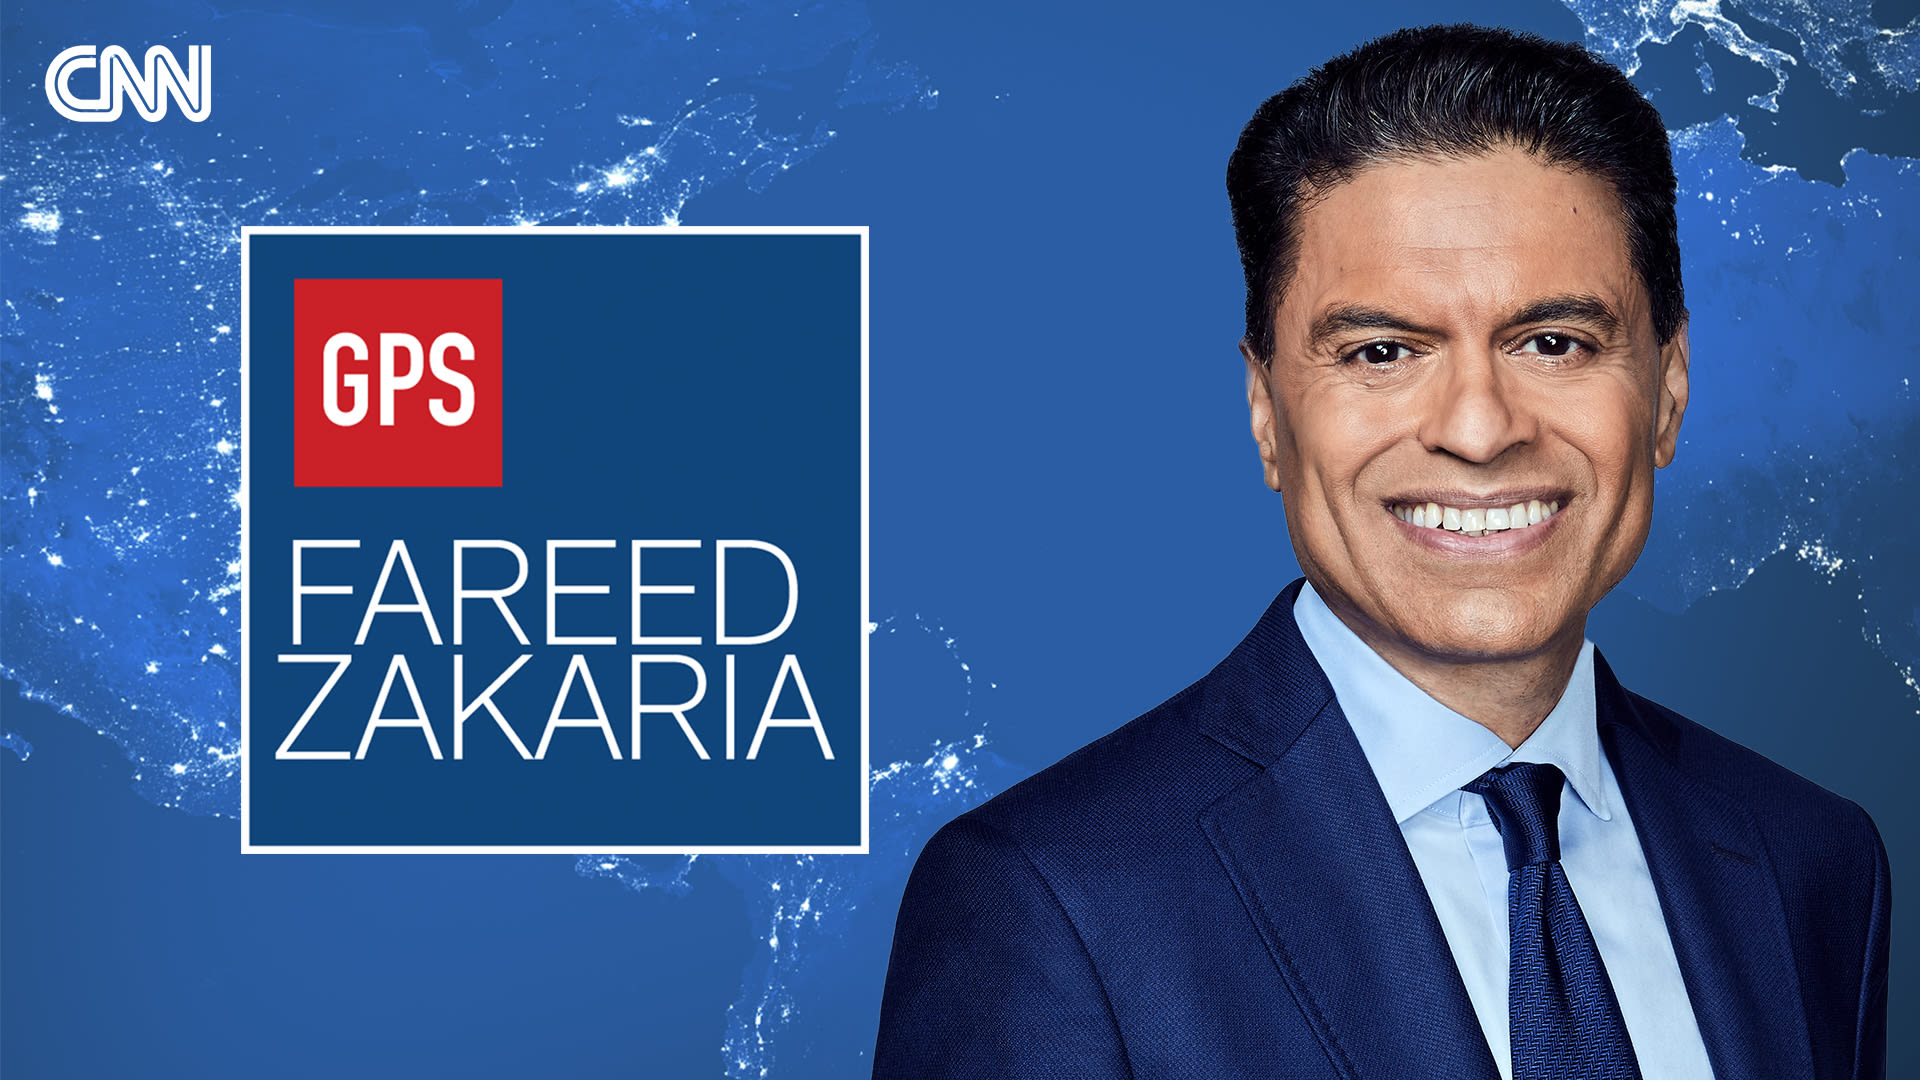 The fallout from Biden’s debate performance - Fareed Zakaria GPS - Podcast on CNN Audio